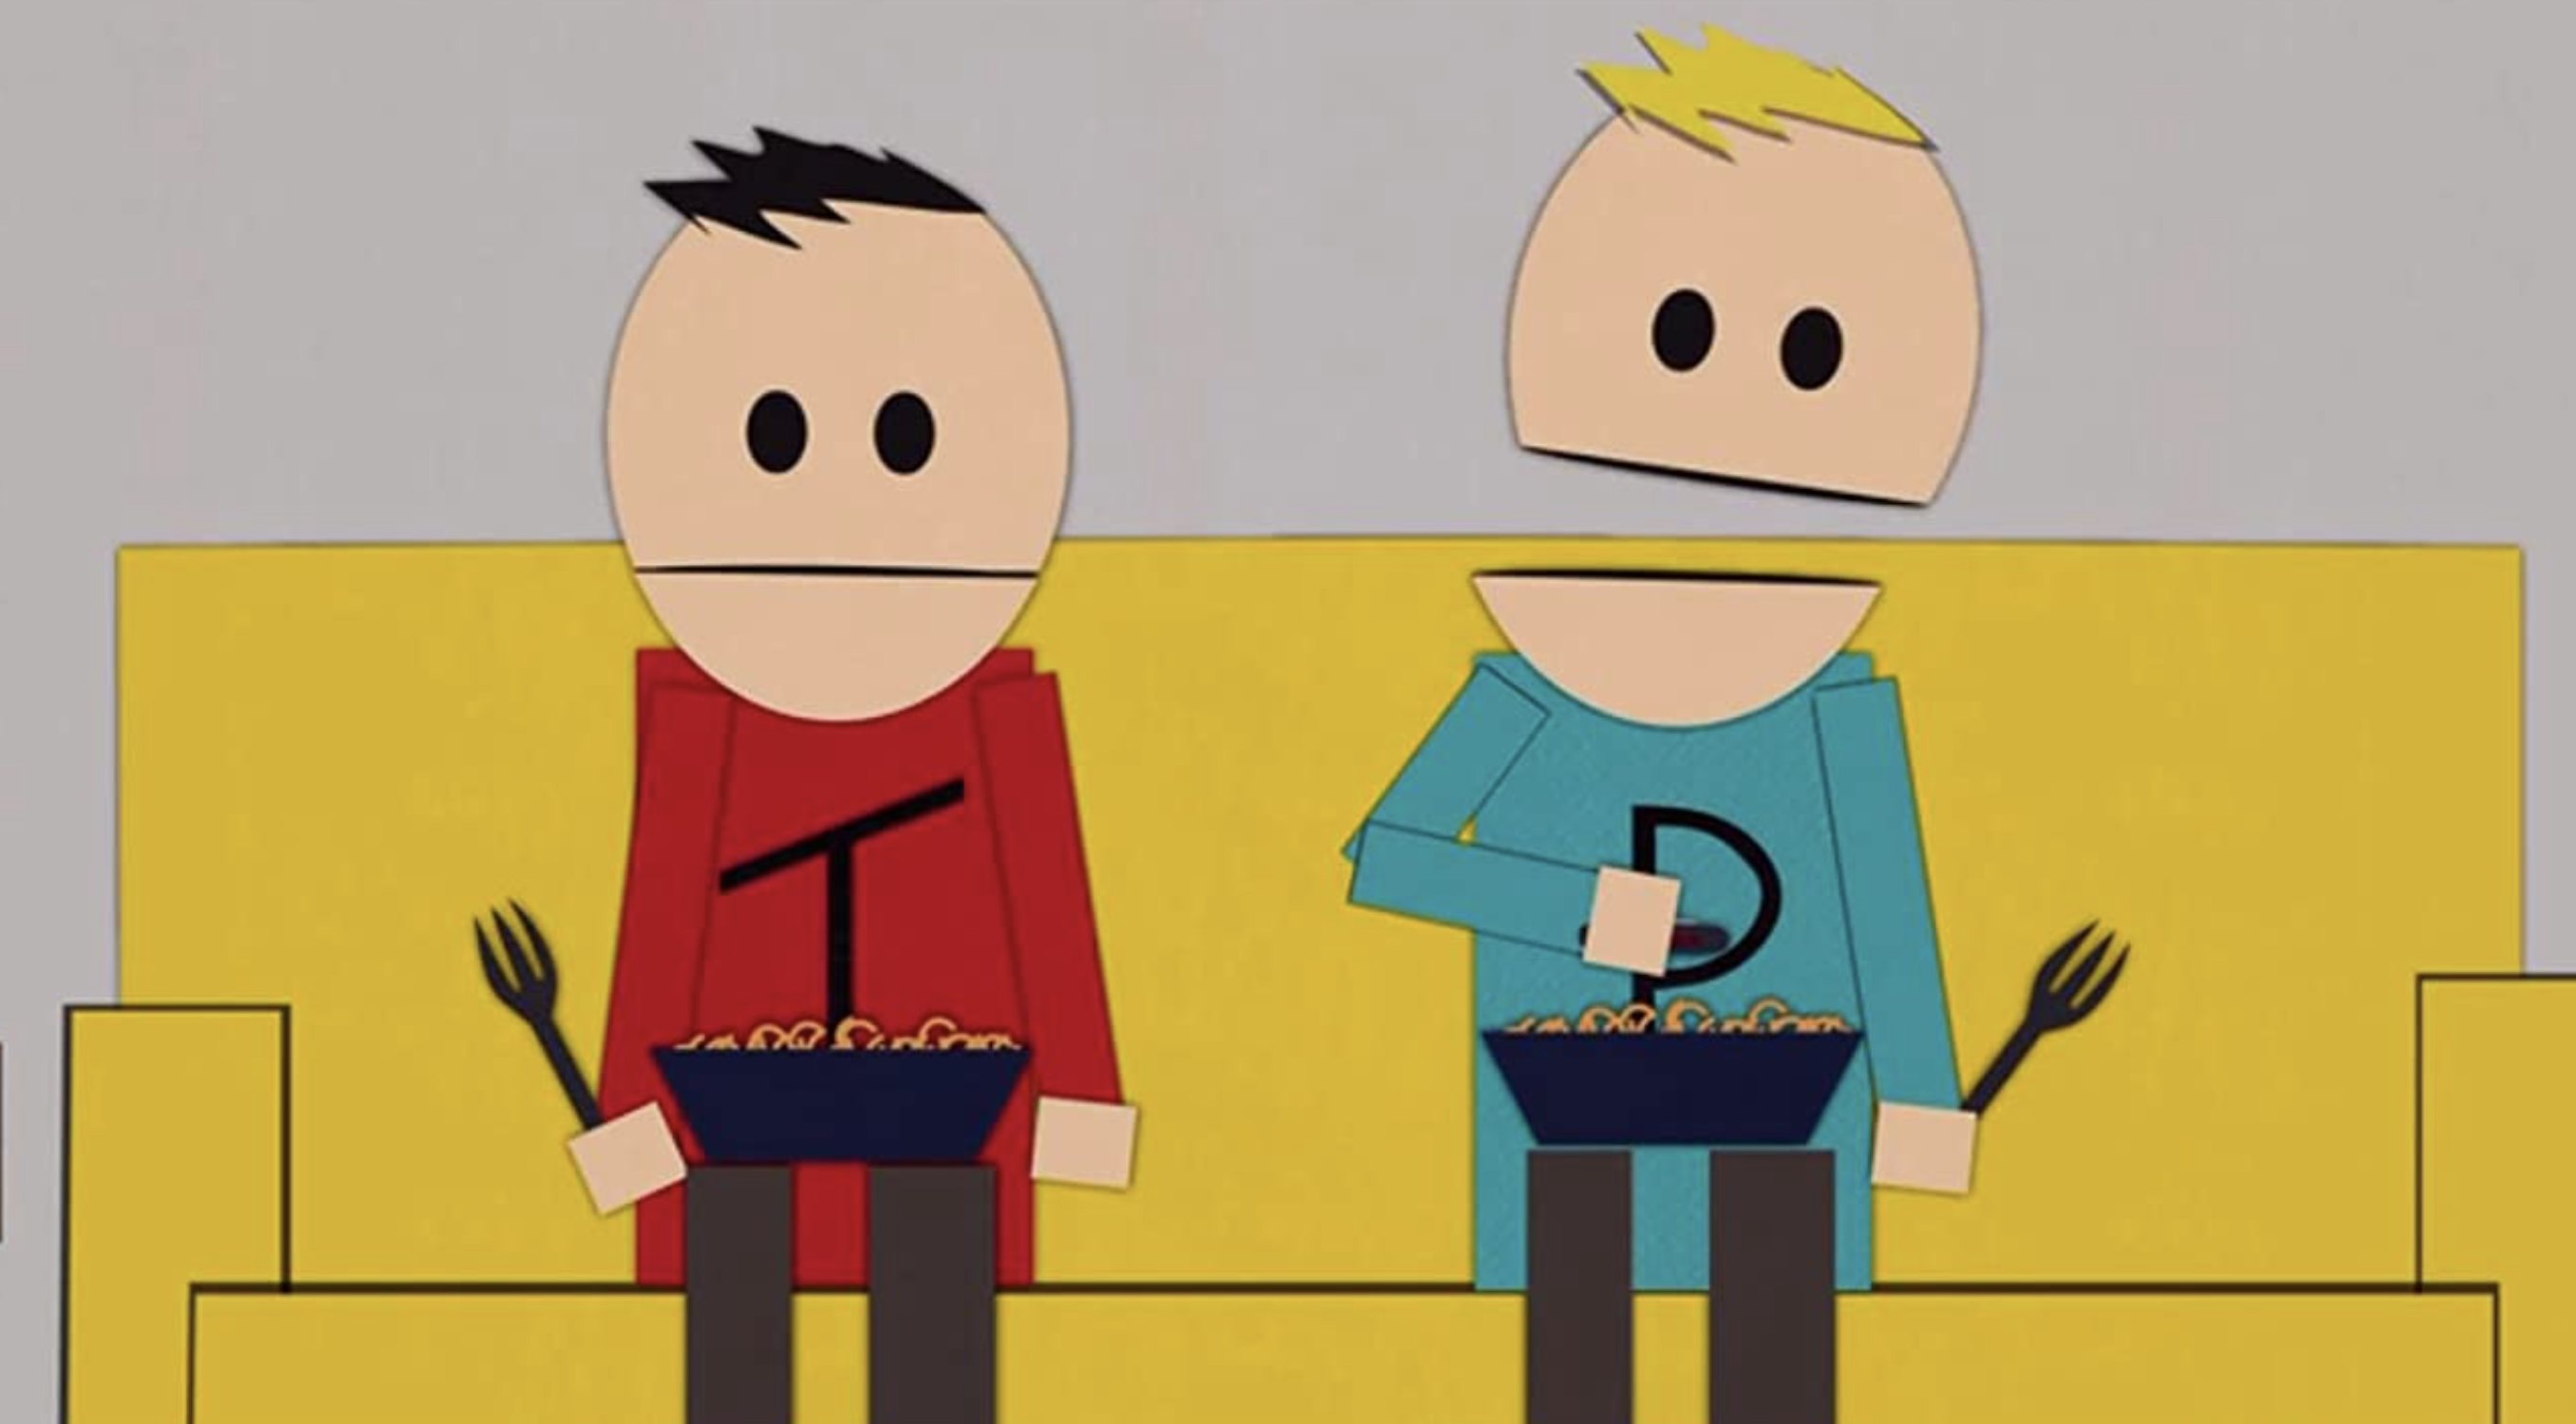 Goin’ Down to South Park Guide S 2 E 1 ‘Terrance and Phillip in Not Without My Anus’